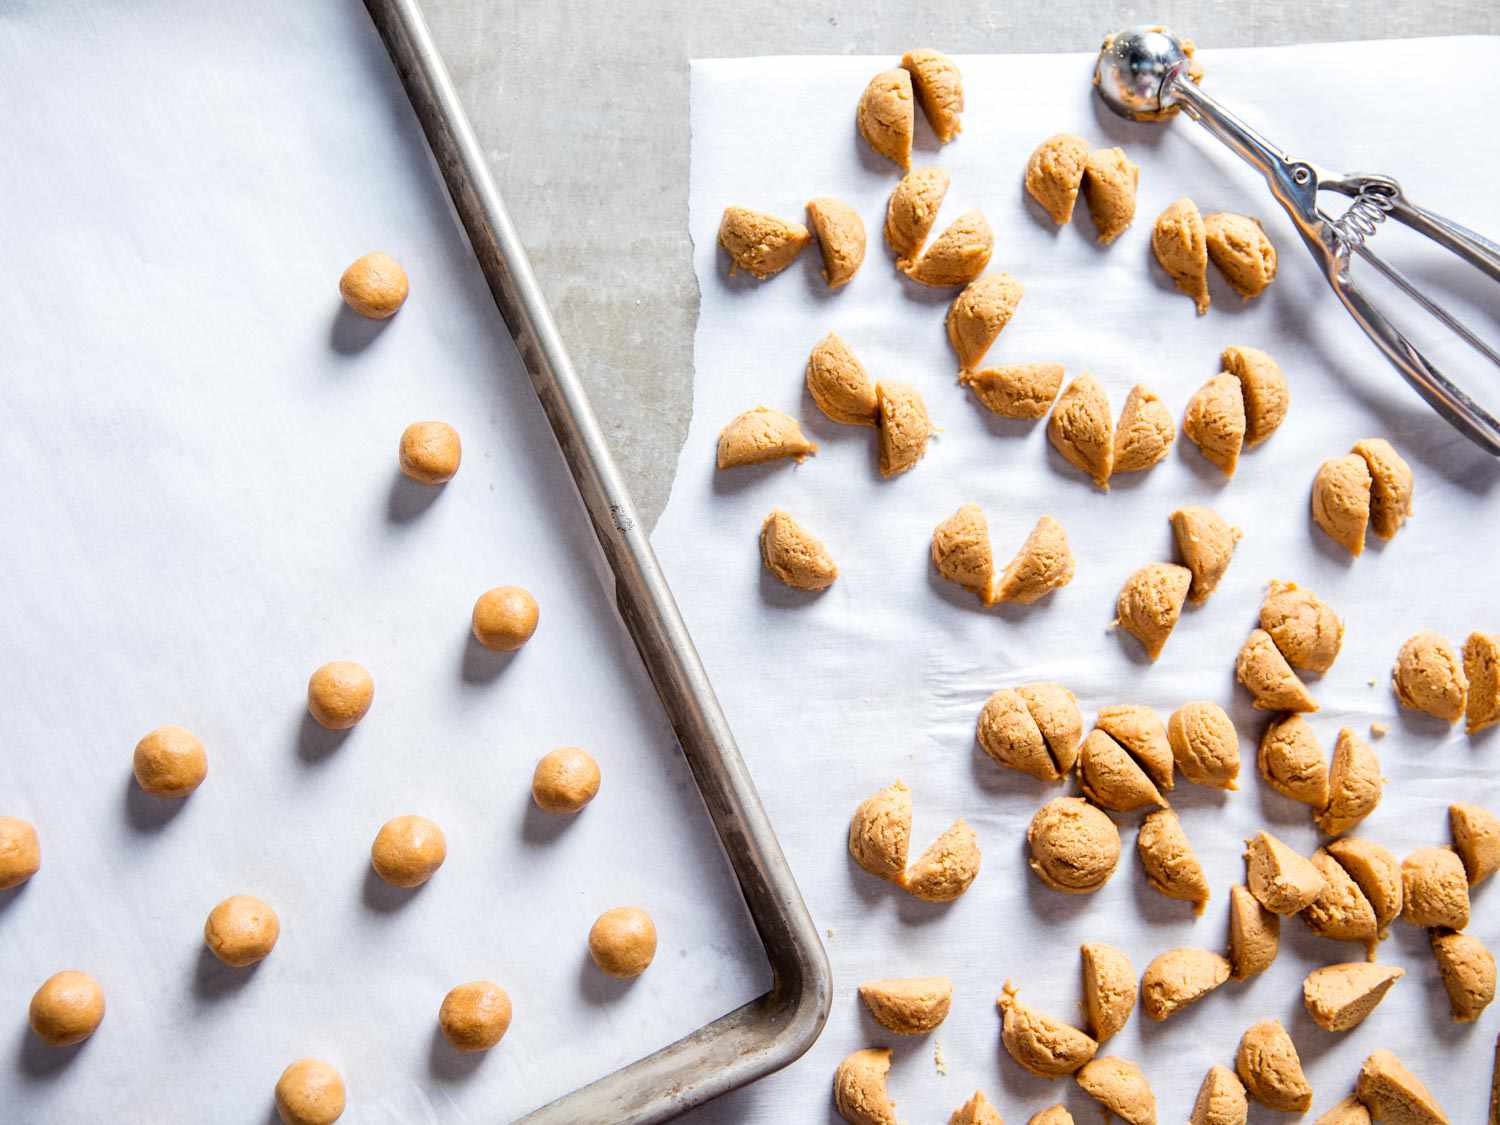 Scoops of the cookie dough are split in half, then rolled into balls and transferred to a parchment-lined baking sheet.